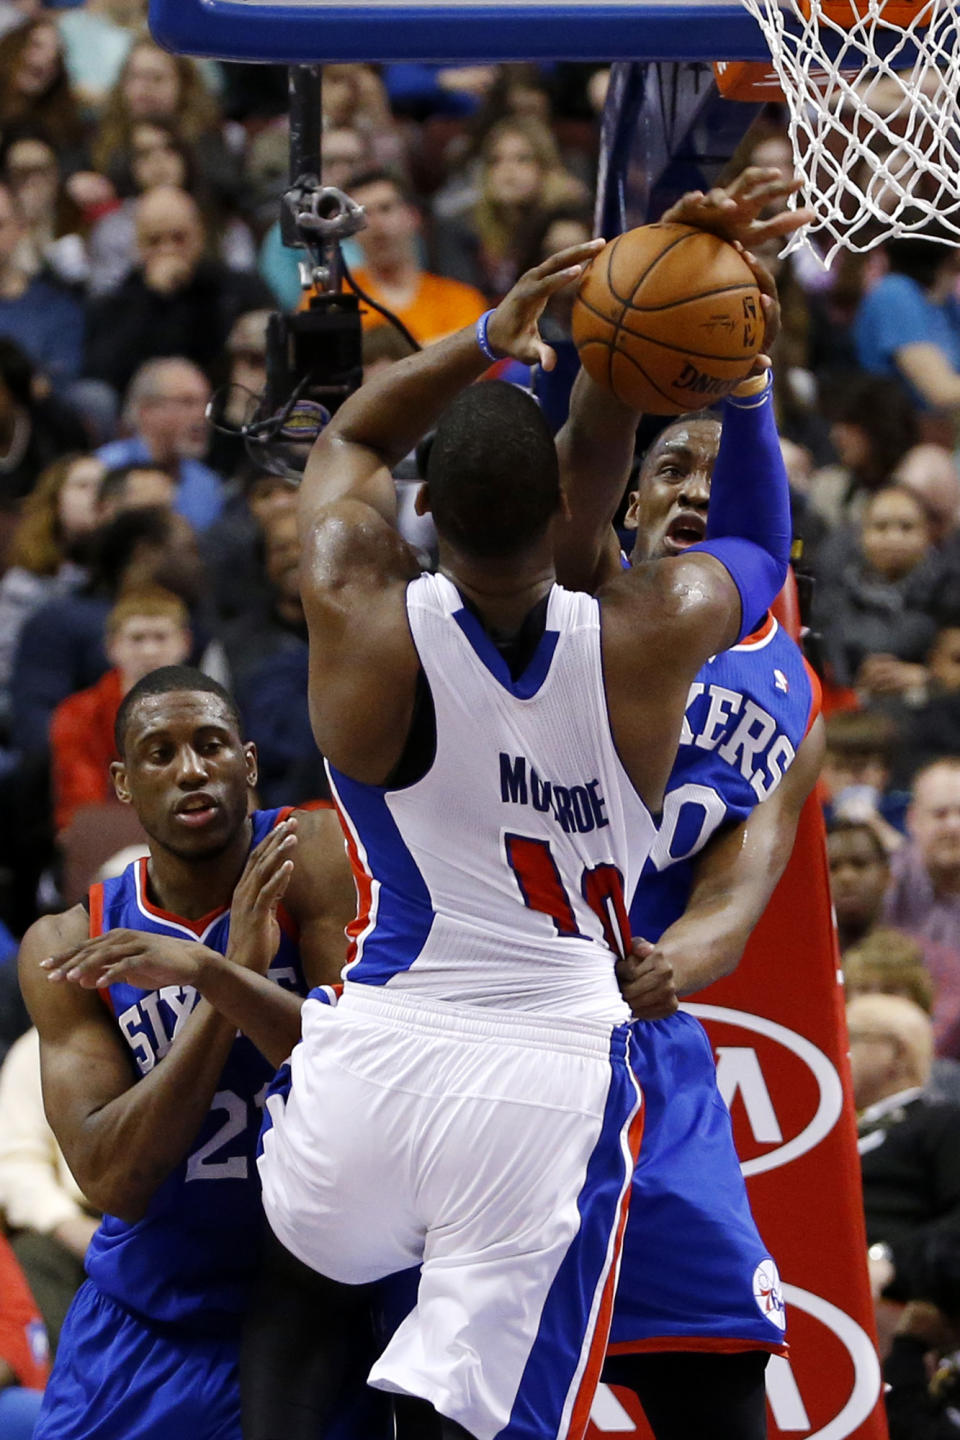 Detroit Pistons' Greg Monroe, center, tries to shoot past Philadelphia 76ers' Jarvis Varnado, right, and Thaddeus Young during the first half of an NBA basketball game on Saturday, March 29, 2014, in Philadelphia. (AP Photo/Matt Slocum)